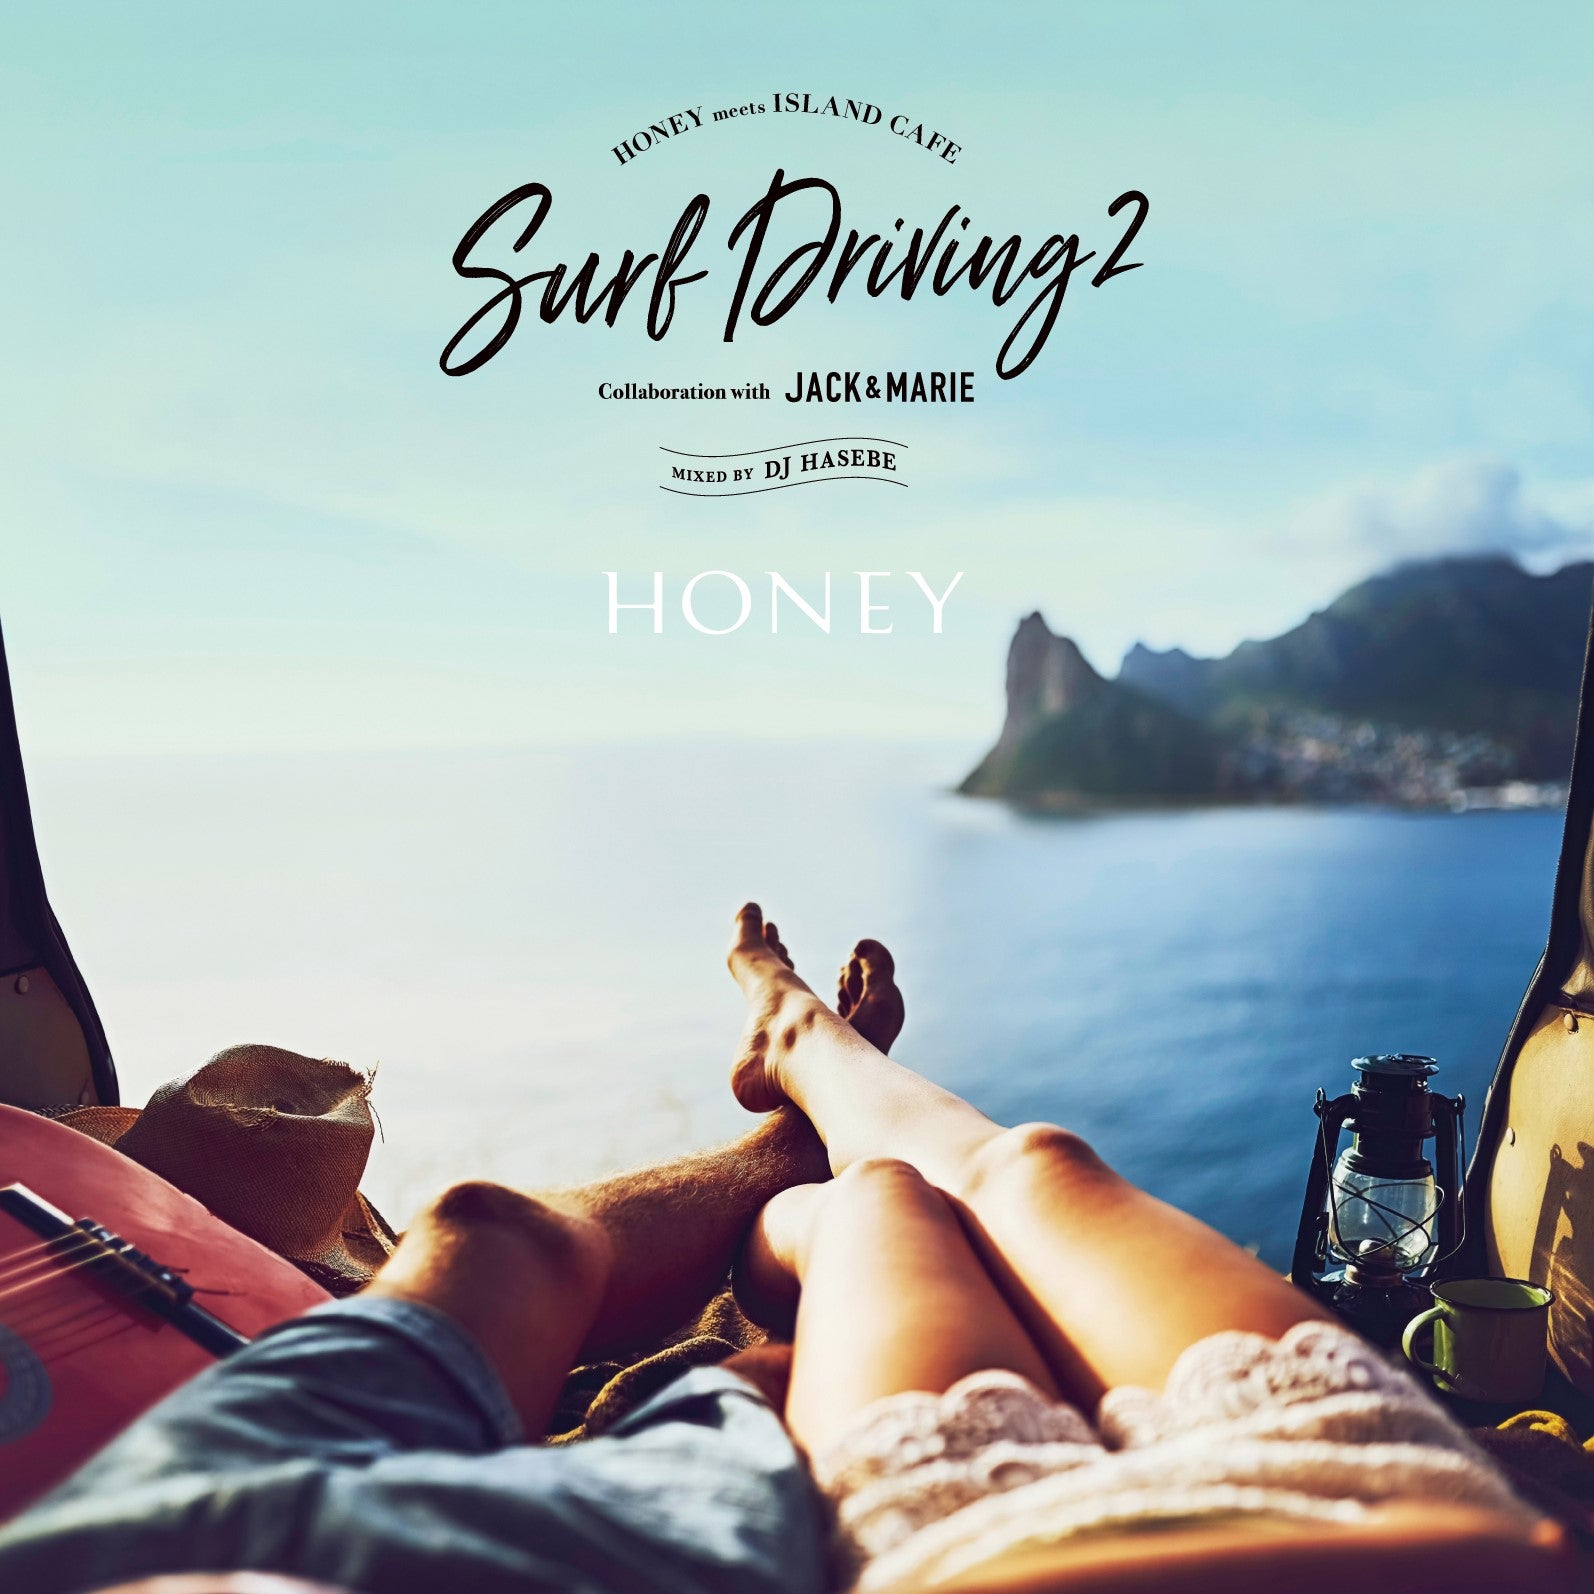 HONEY meets ISLAND CAFE -SURF DRIVING 2- Collaboration with JACK & MARIE mixed by DJ HASEBE